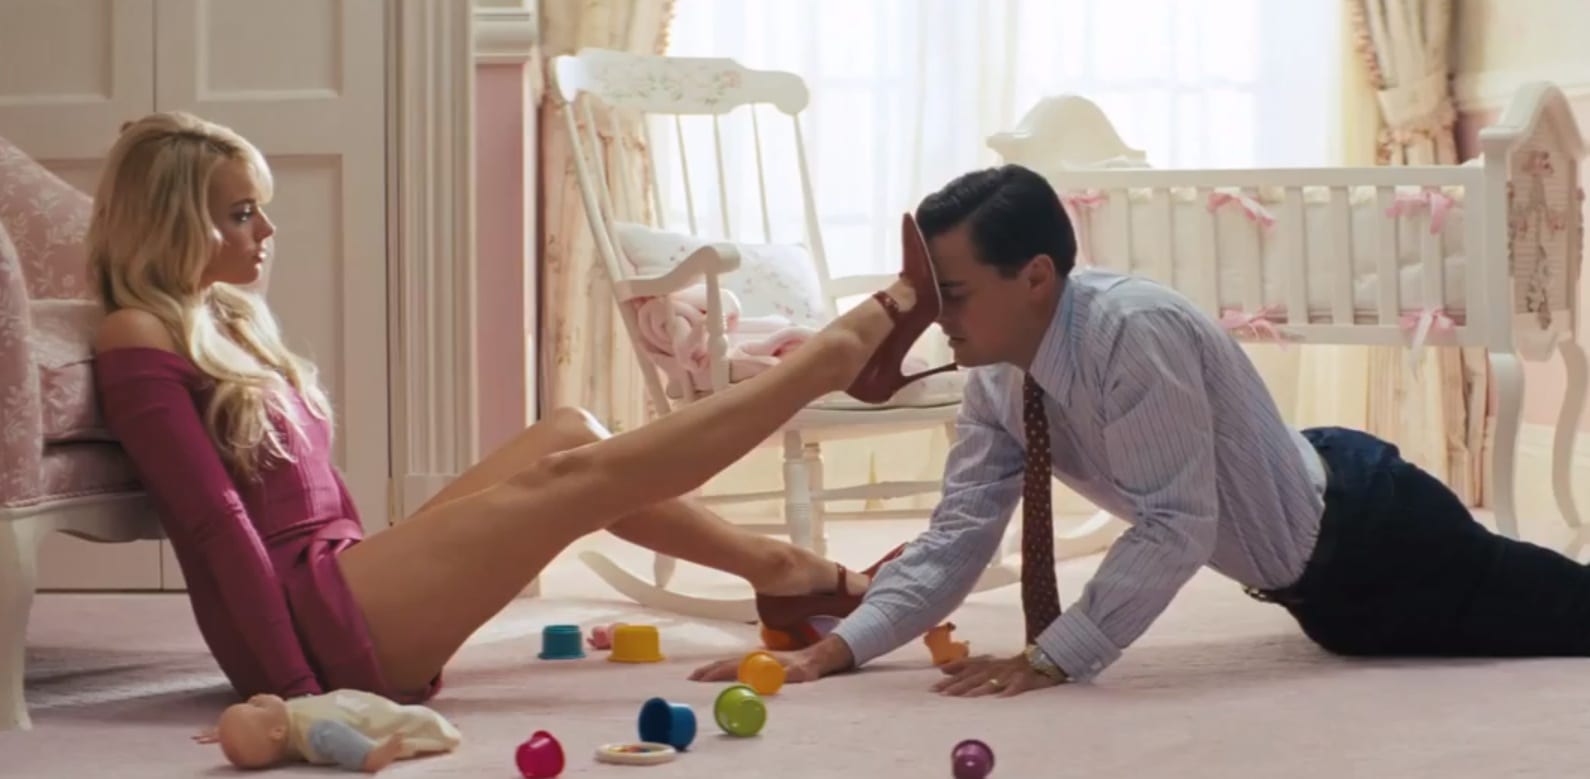 the image features a still from the movie The Wolf of Wall Street. In the image, Leonardo DiCaprio is being pushed away by a beautiful woman.